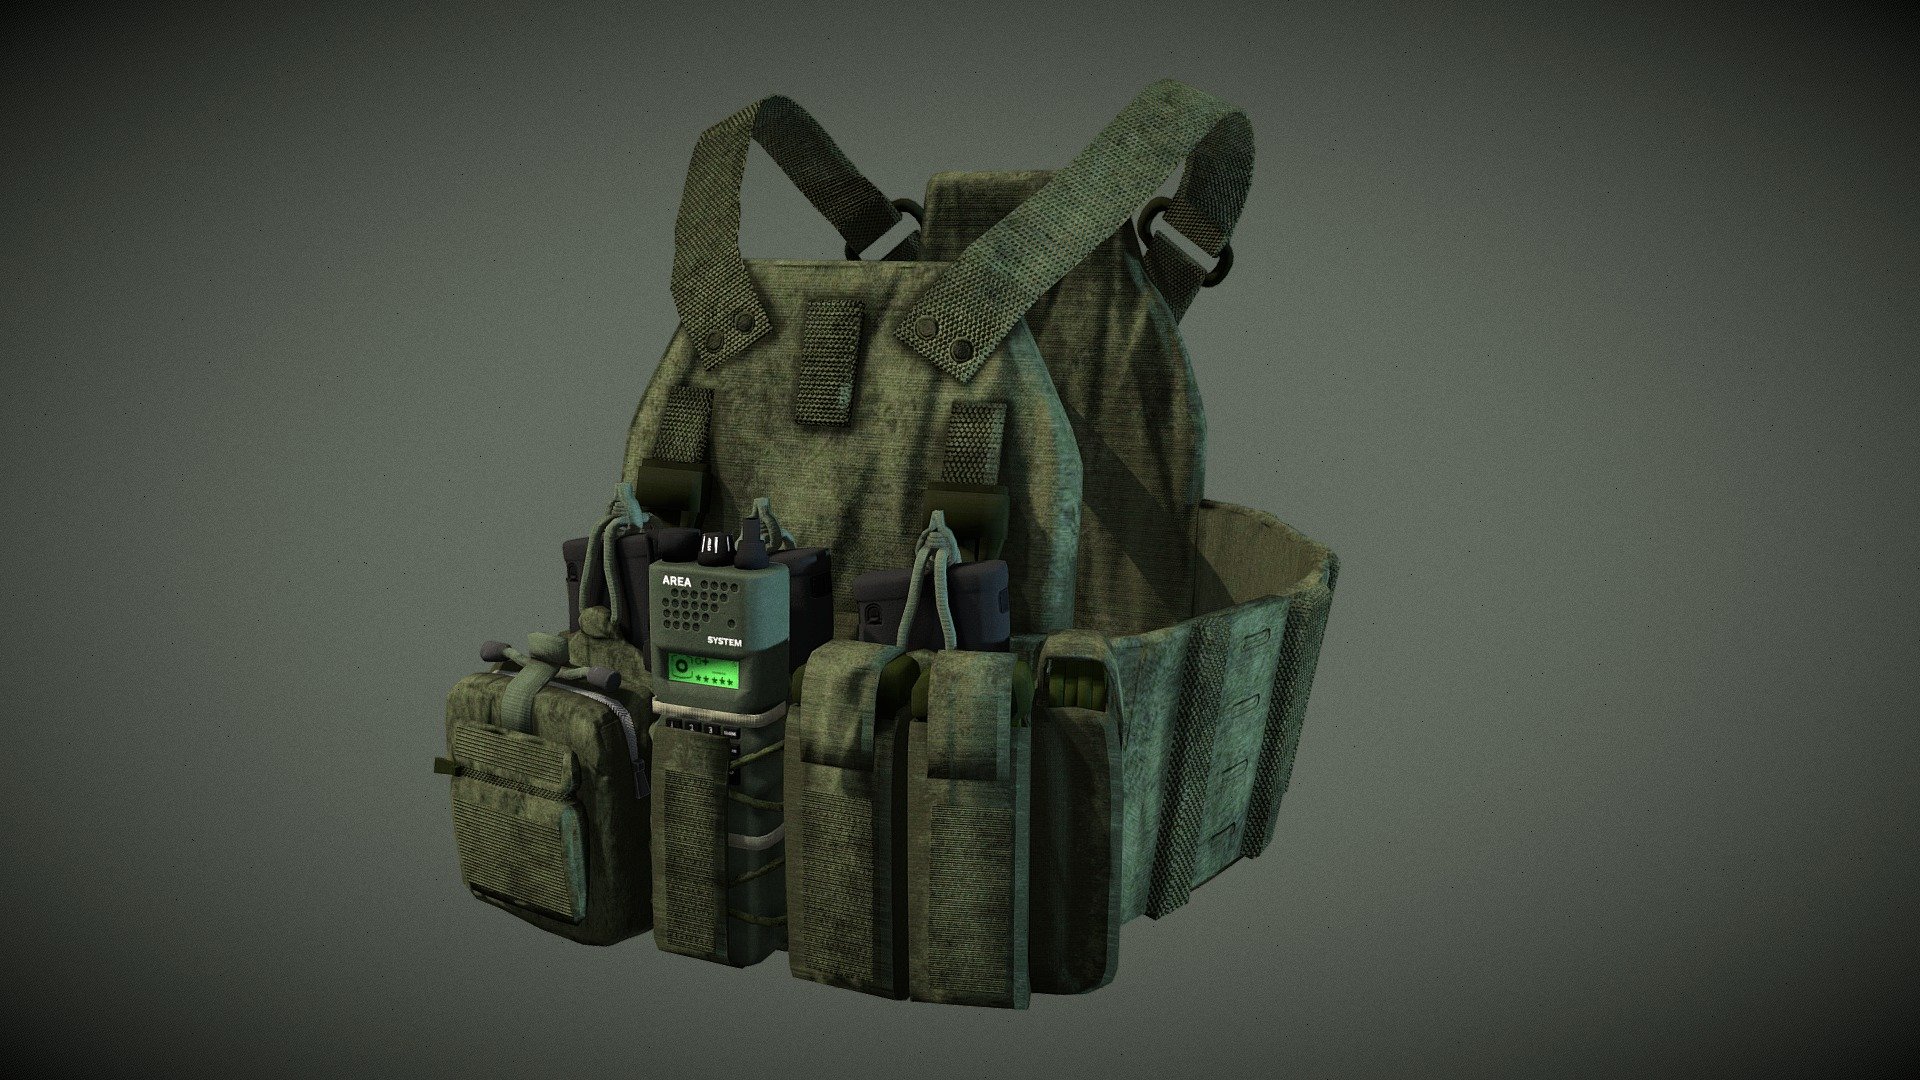 LVC Vest Military Body Armor - Model/Art by Outworld Studios

Must give credit to Outworld Studios if using the asset.

Show support by joining my discord: https://discord.gg/EgWSkp8Cxn - LVC Vest Military Body Armor - Buy Royalty Free 3D model by Outworld Studios (@outworldstudios) 3d model